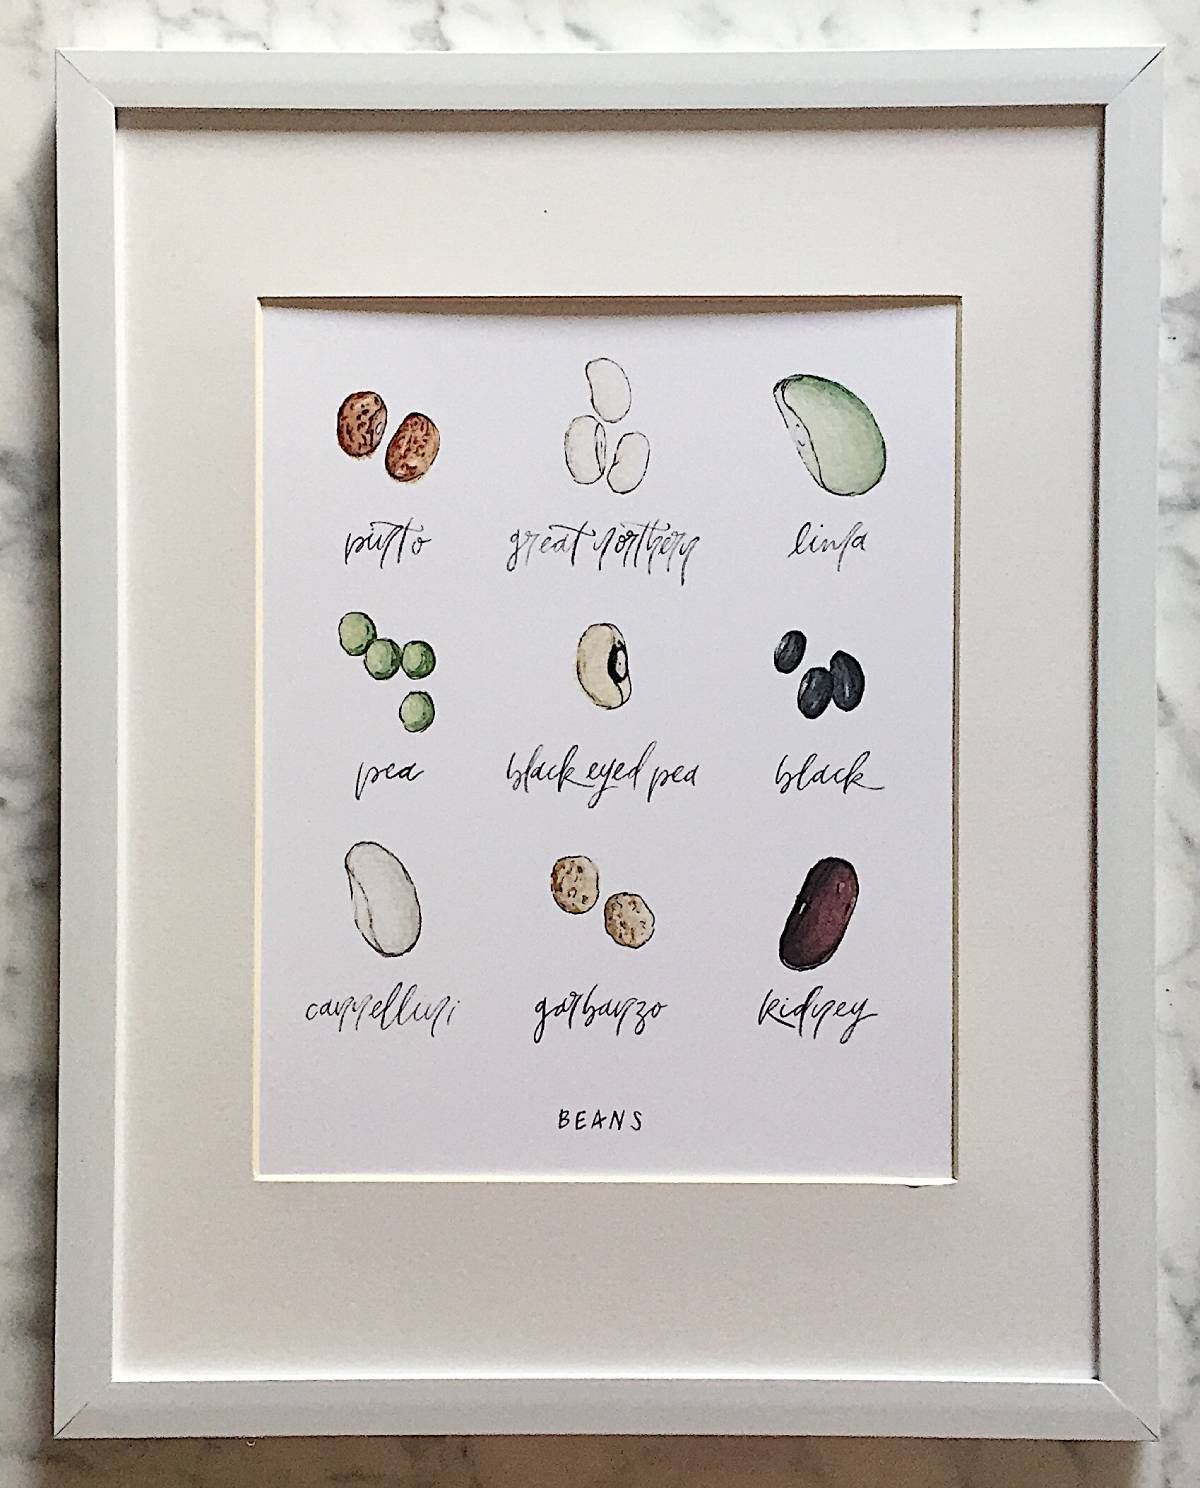 A watercolor art print display 9 popular types of beans with a crisp white background